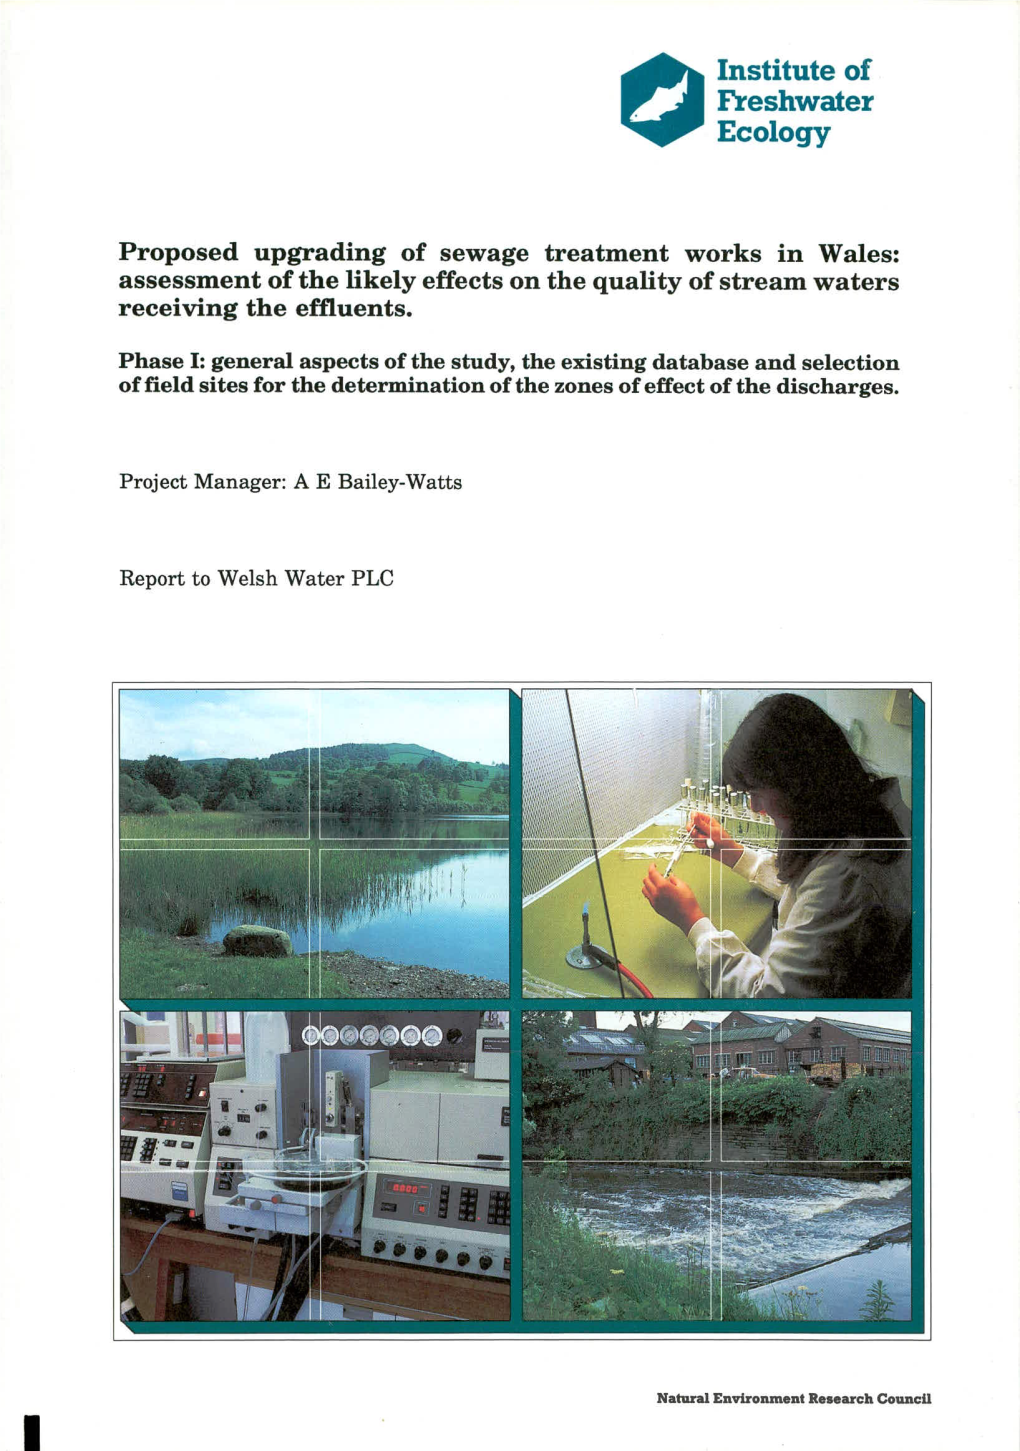 Welsh Water Stws — Consent >49 Mg BOD/L: Mean BOD in Effluent Related to Consent